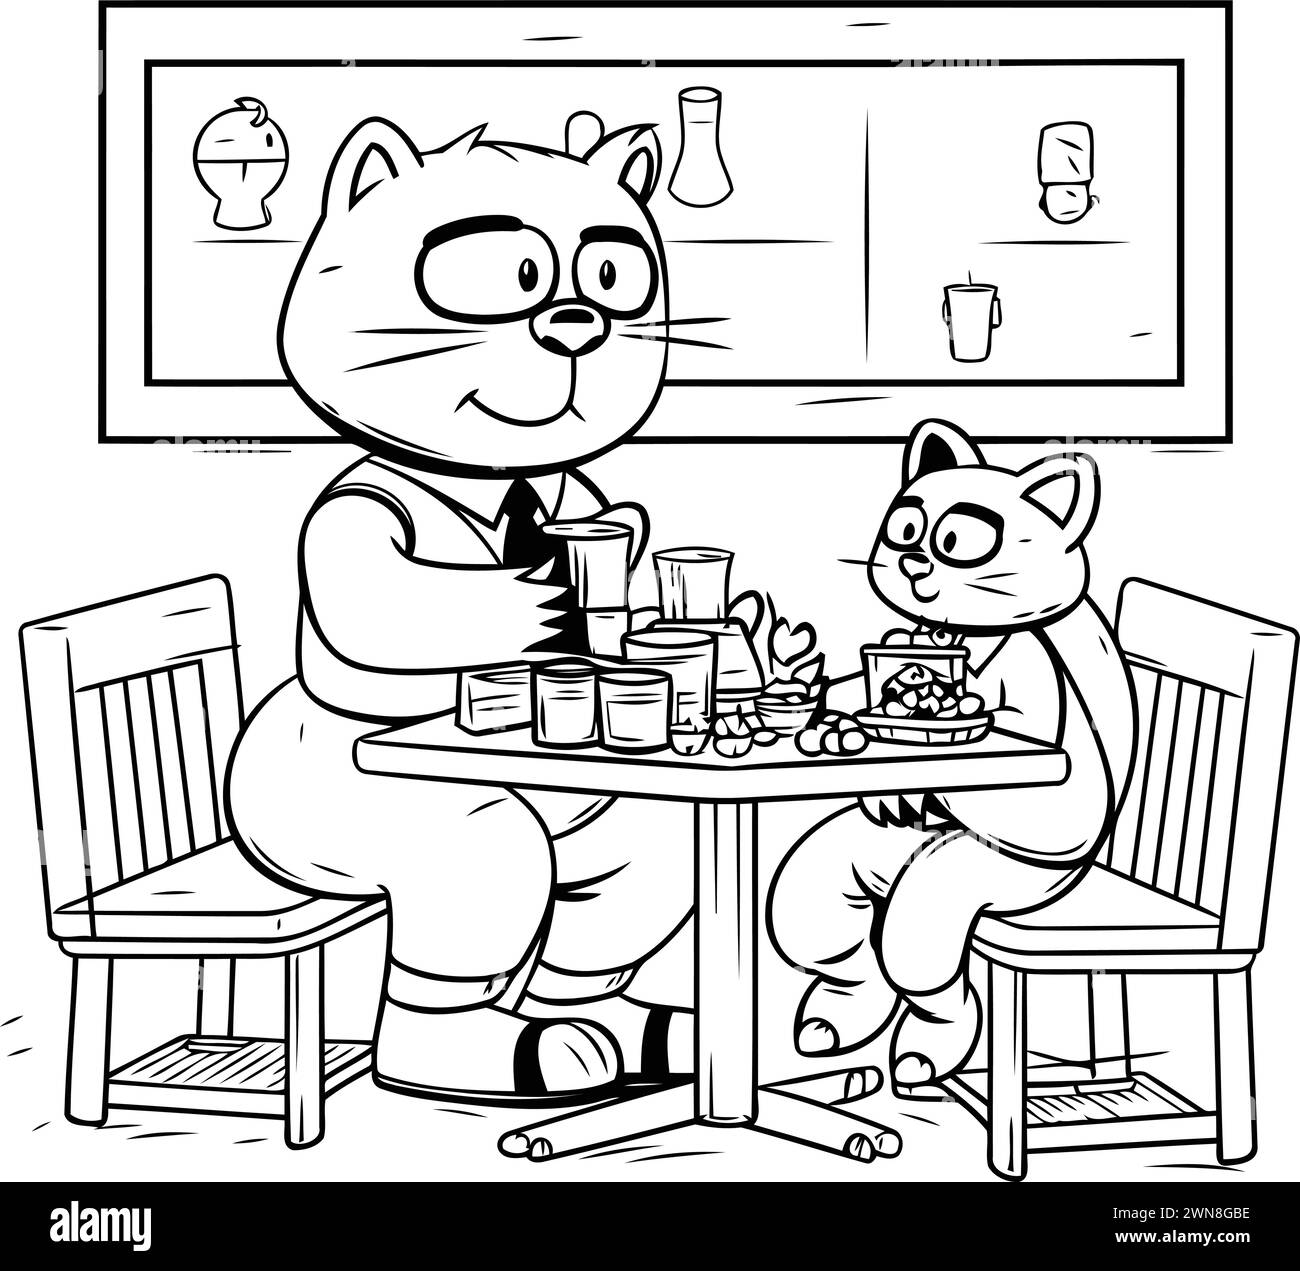 Black and White Cartoon Illustration of Cat Sitting at the Table and Eating Food for Coloring Book Stock Vector